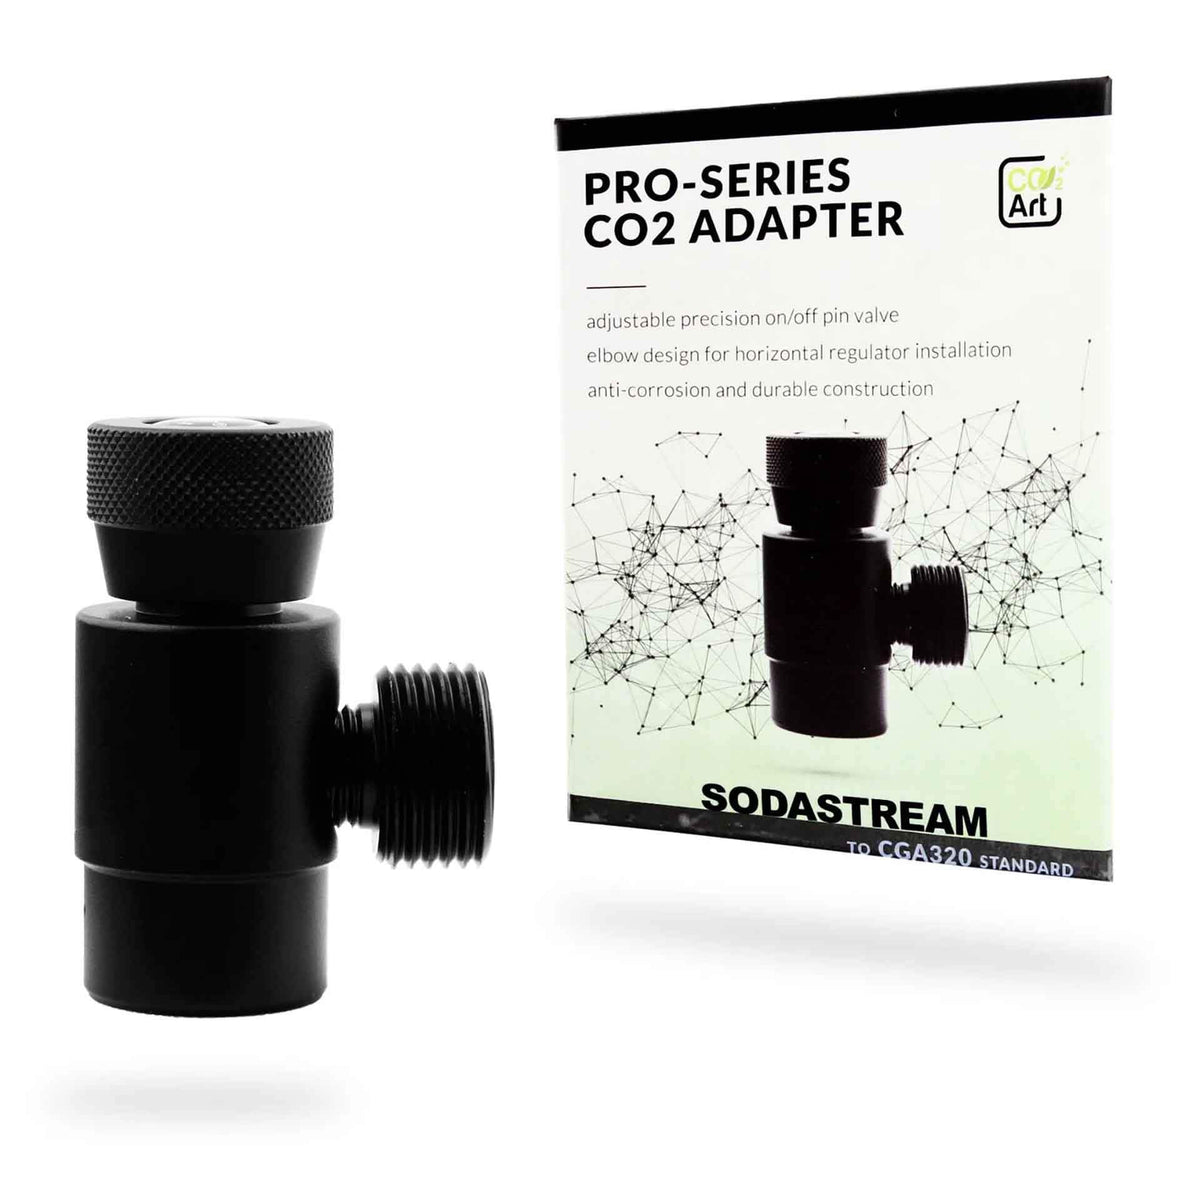 CO2 Art Pro-Series CO2 Adapter for Paintball, Sodastream or Disposable Bottles